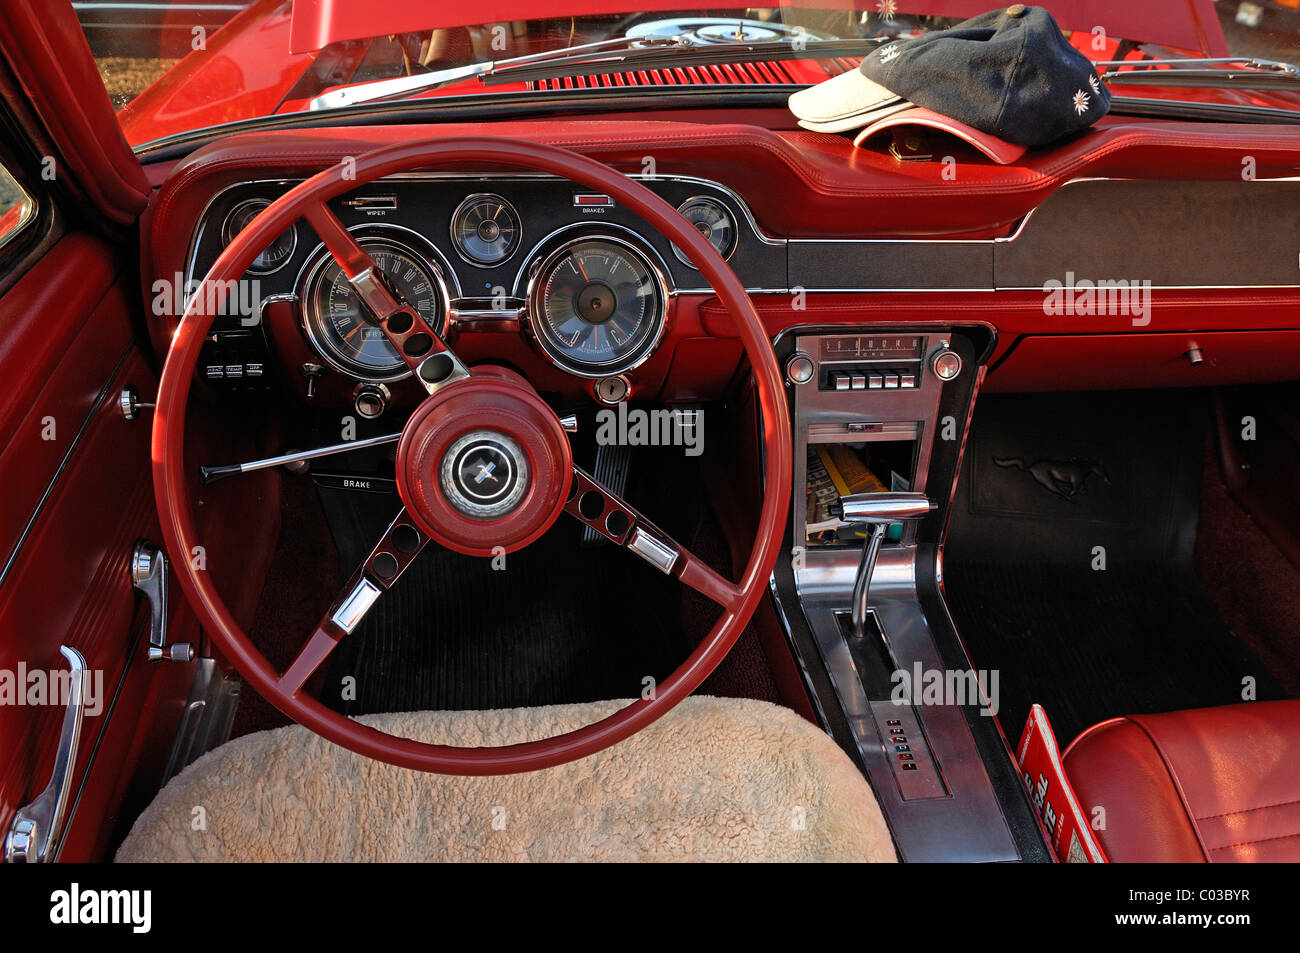 Detailed View Of A Classic Car Cockpit Of A Ford Mustang Stock Photo Alamy